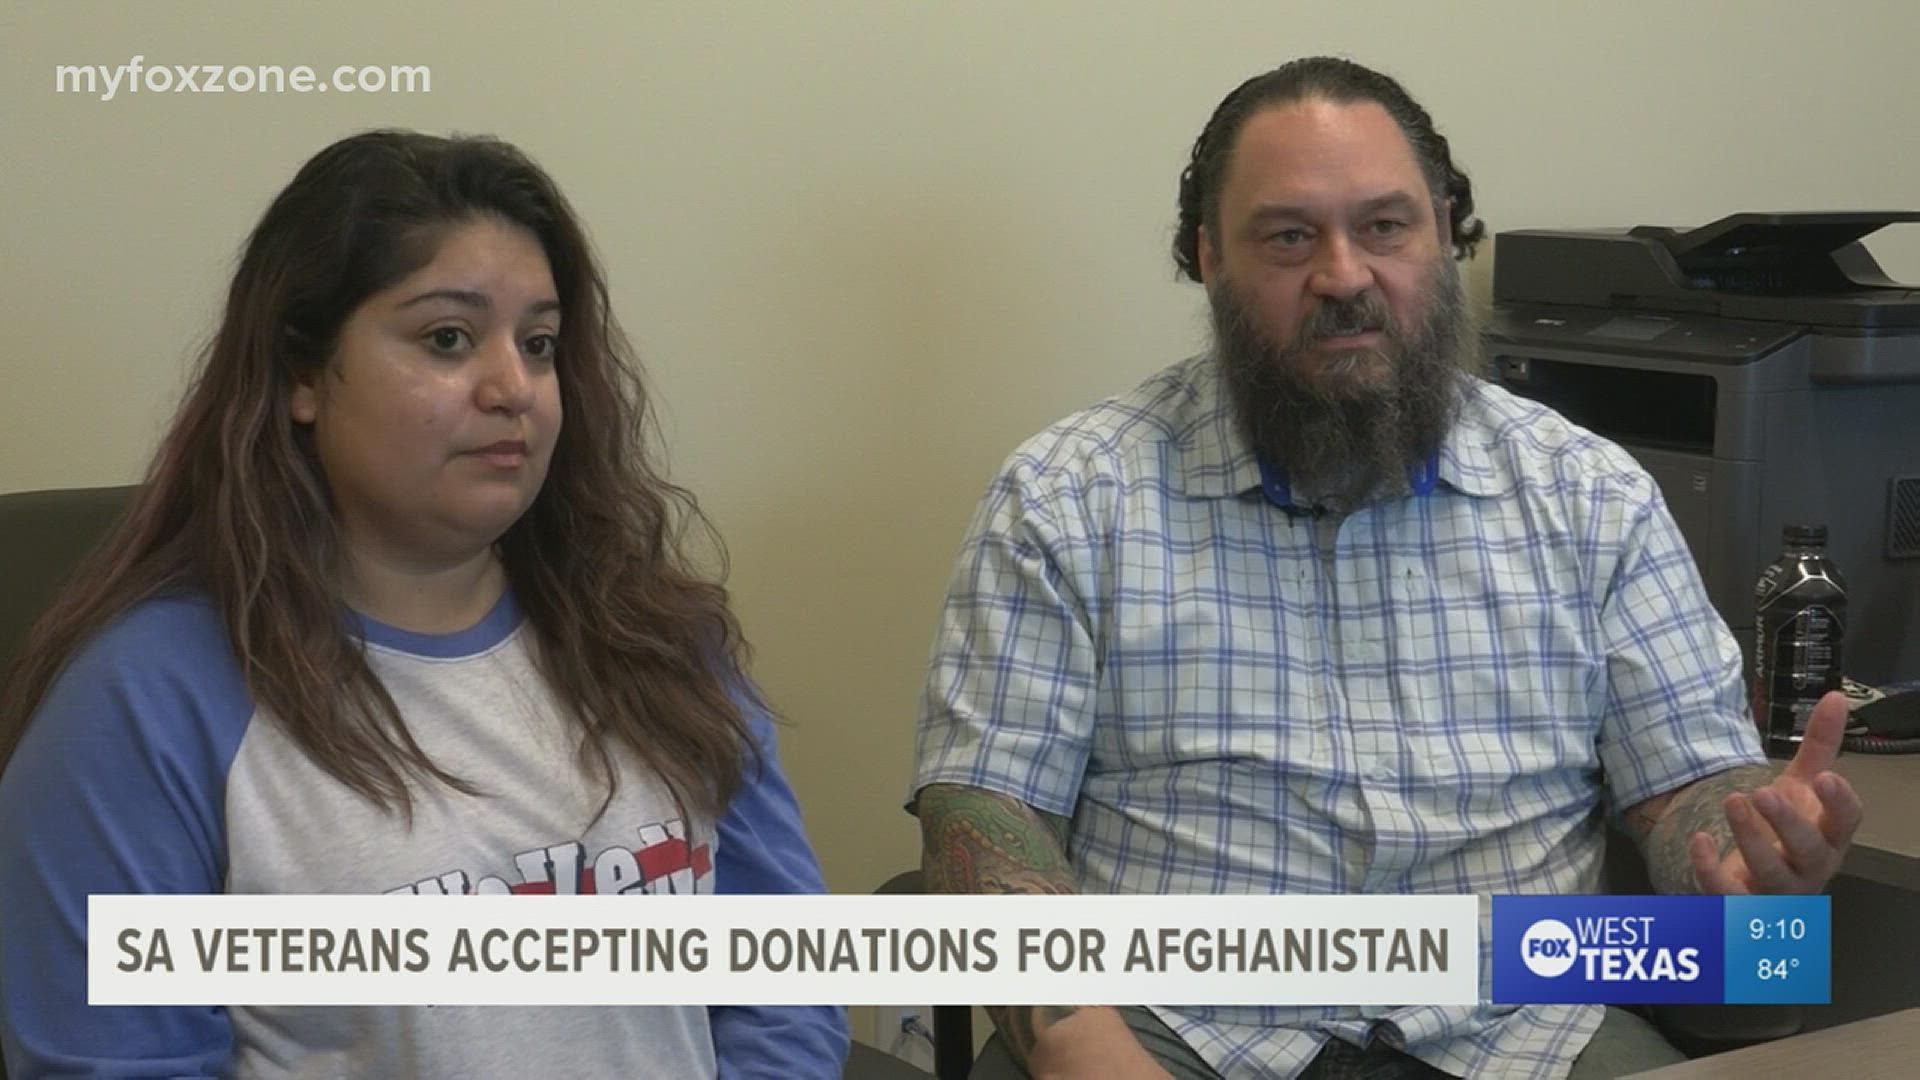 Military veterans are asking for donations to give to people overseas.